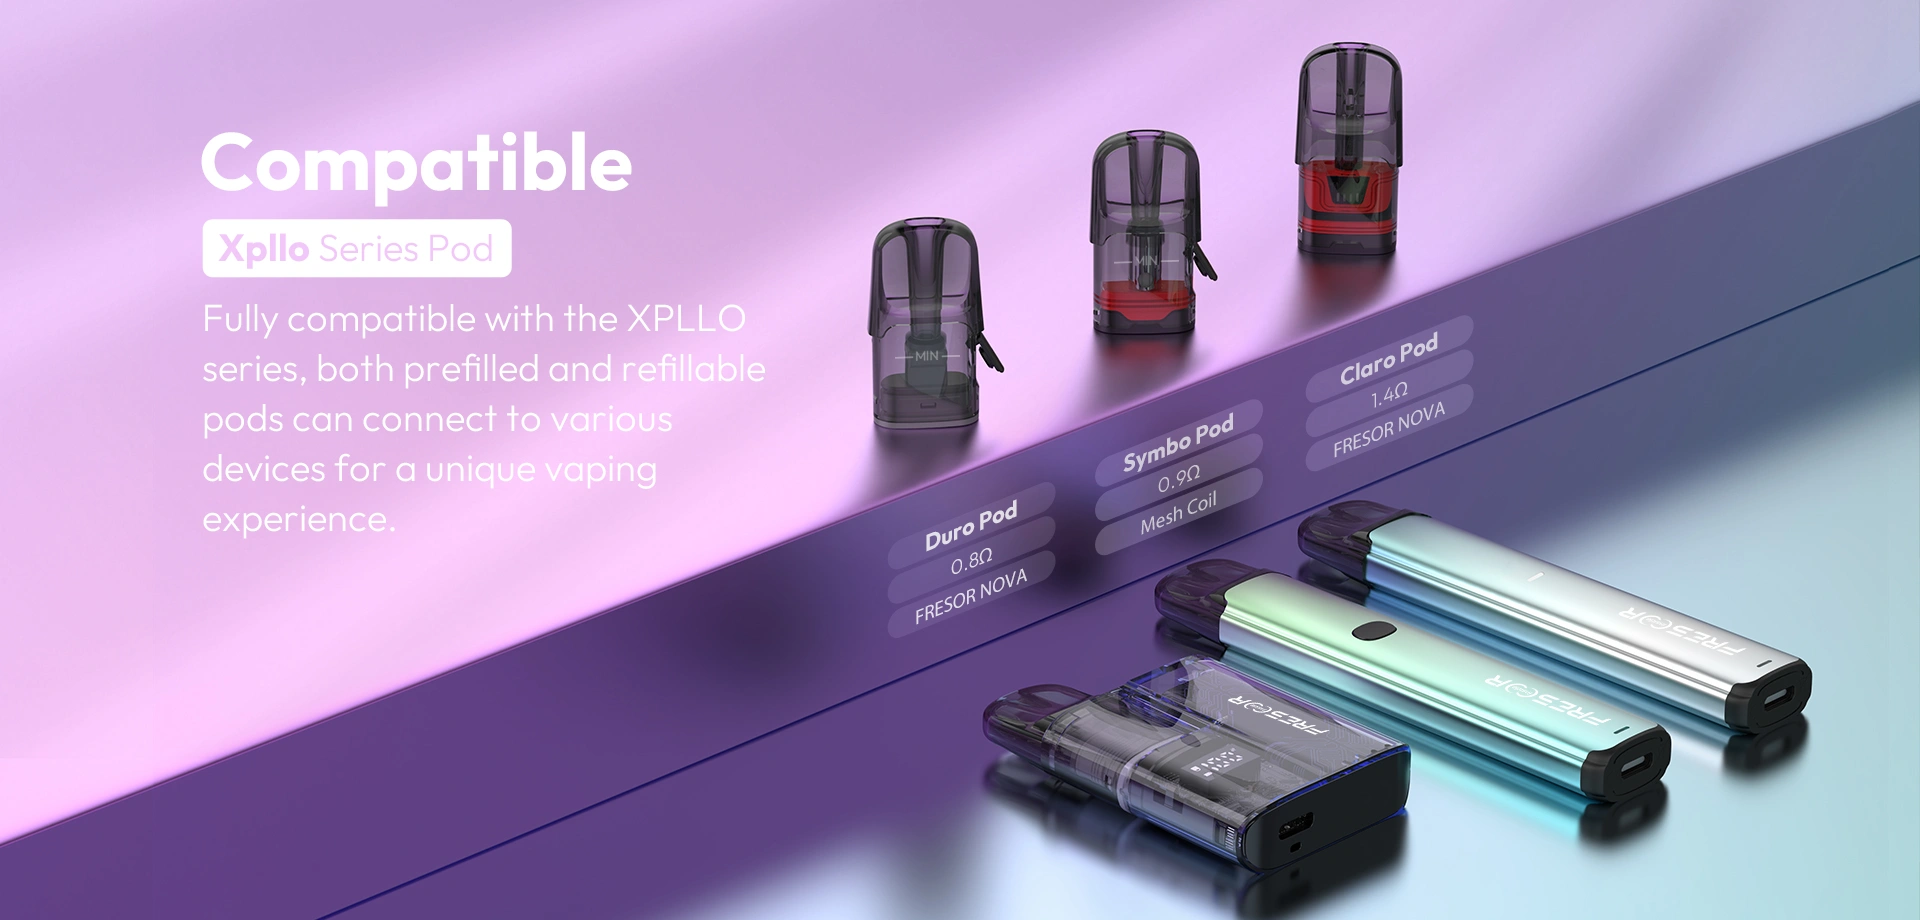 Compatible Xpllo Series Pod  Fully compatible with the XPLLO series, both prefilled and refillable pods can connect to various devices for a unique vaping experience.